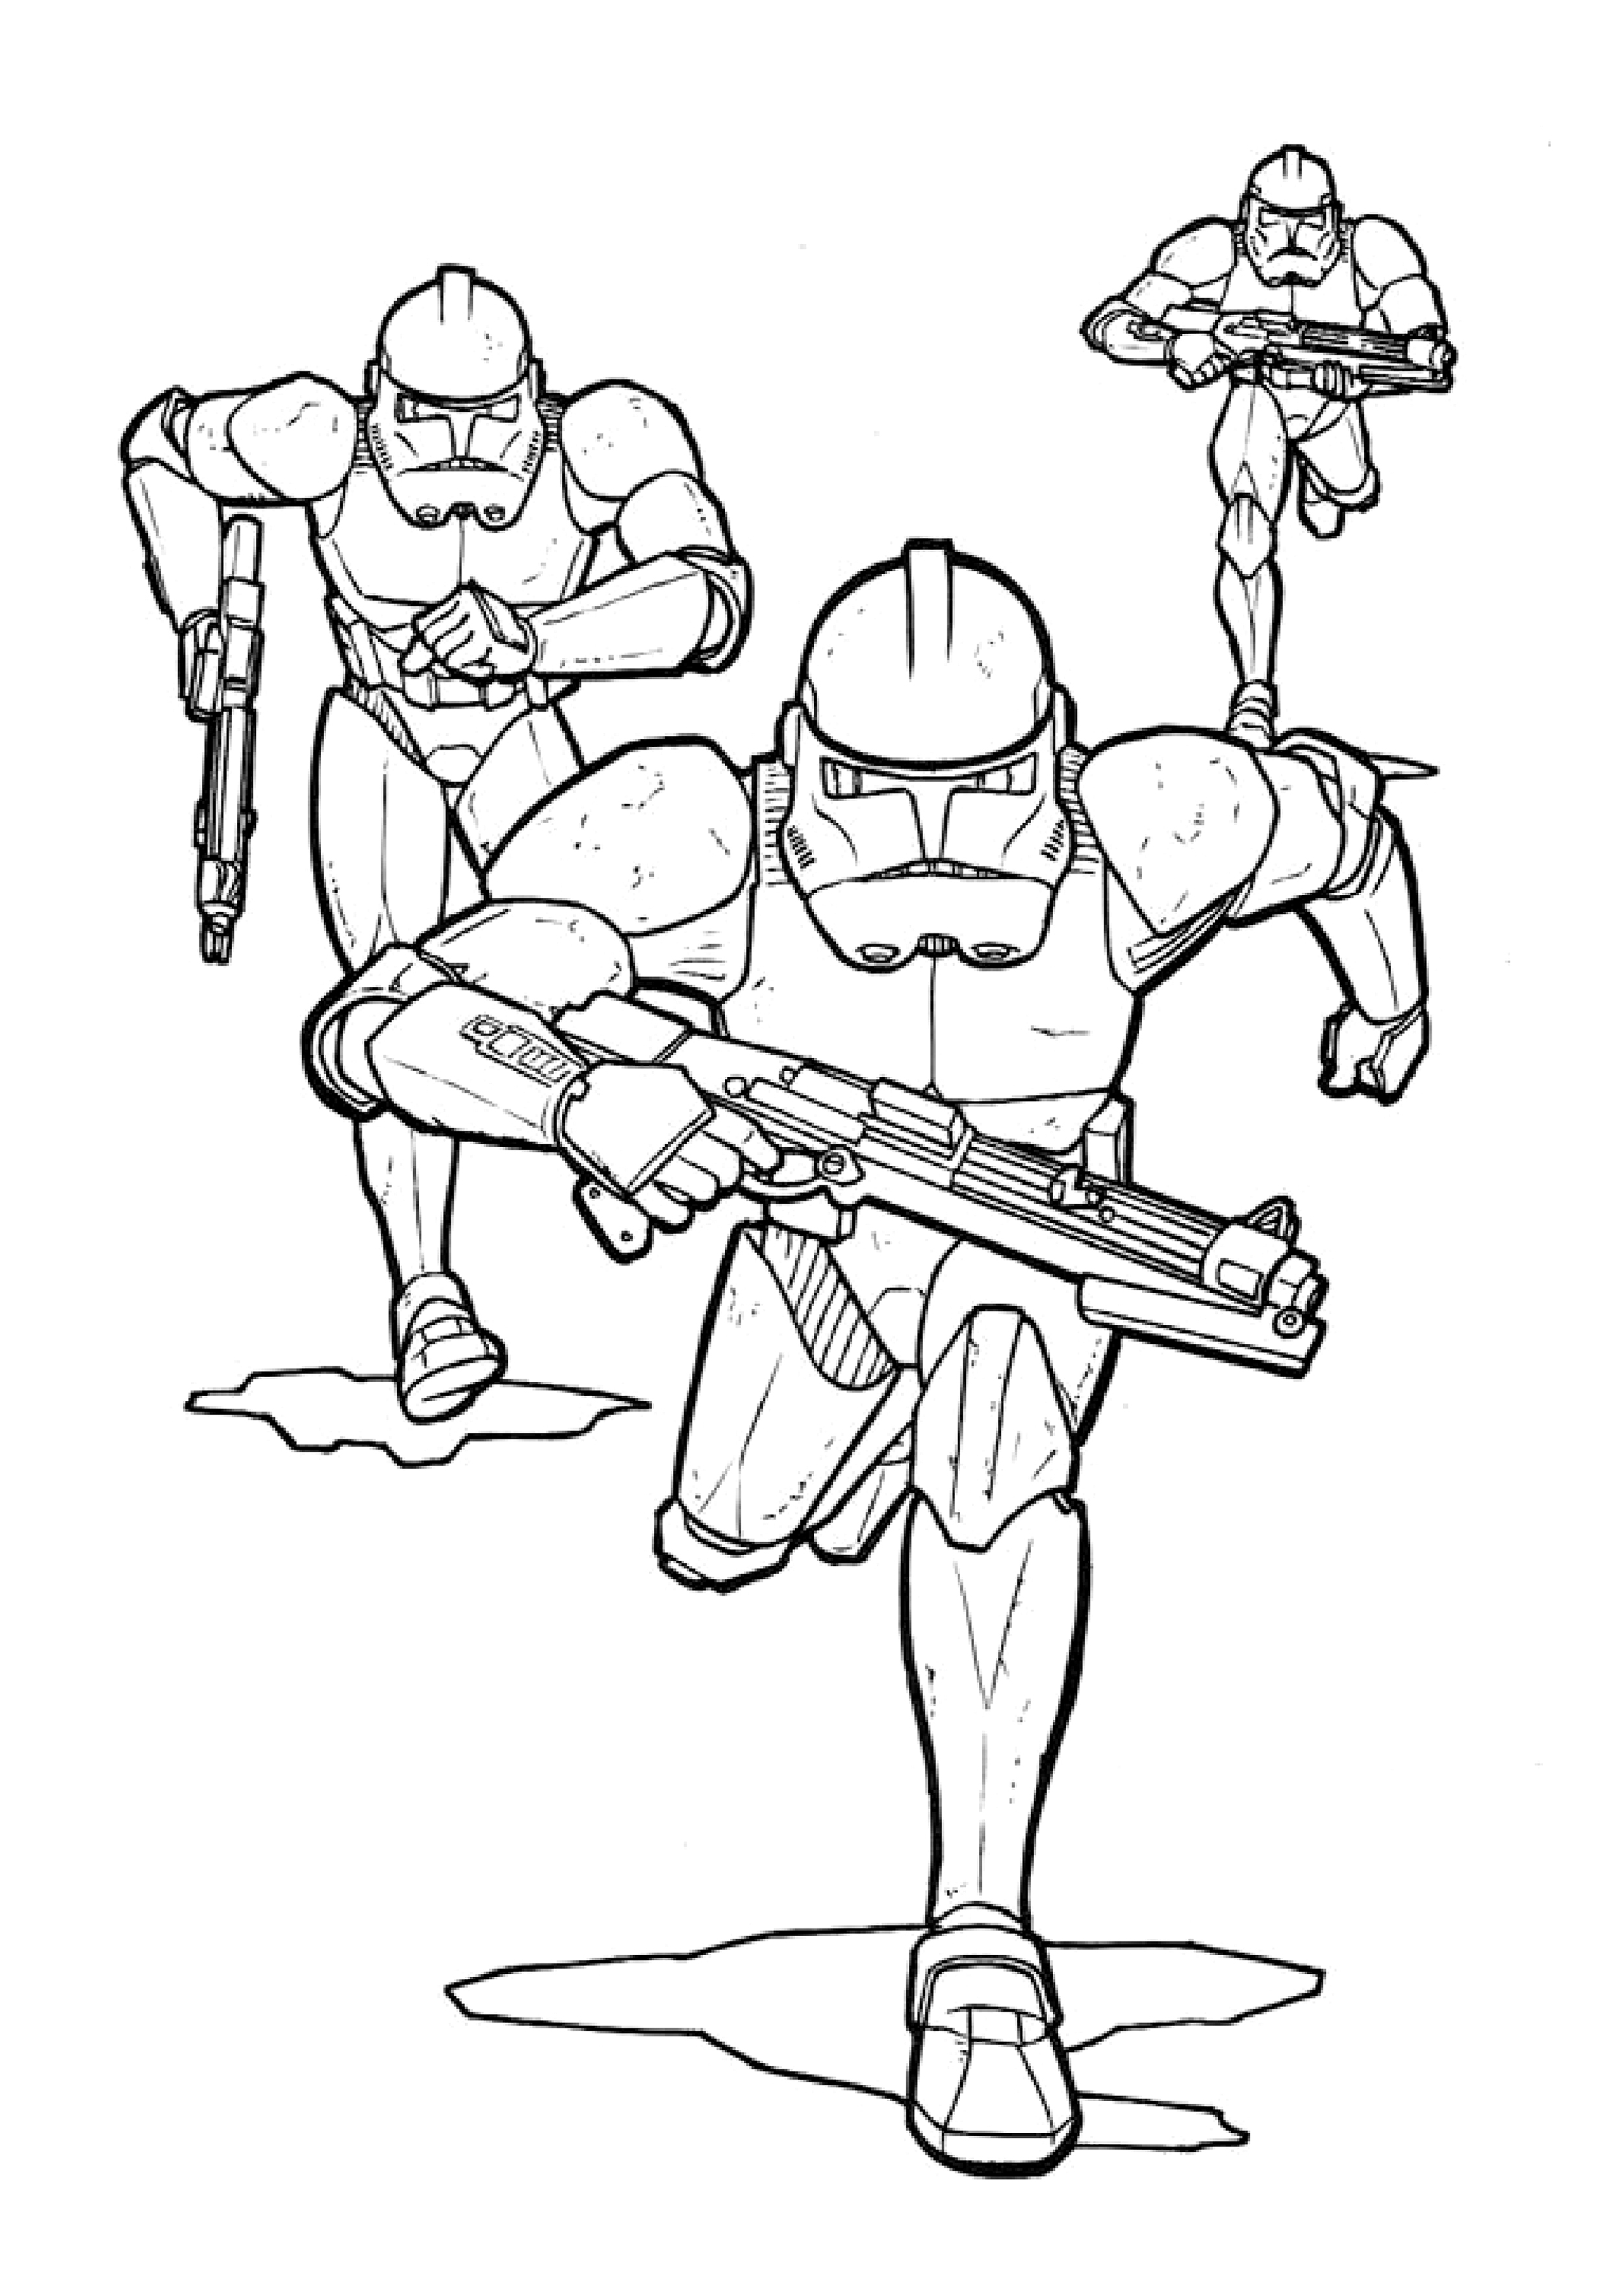 Download Star wars to print - Star Wars Kids Coloring Pages